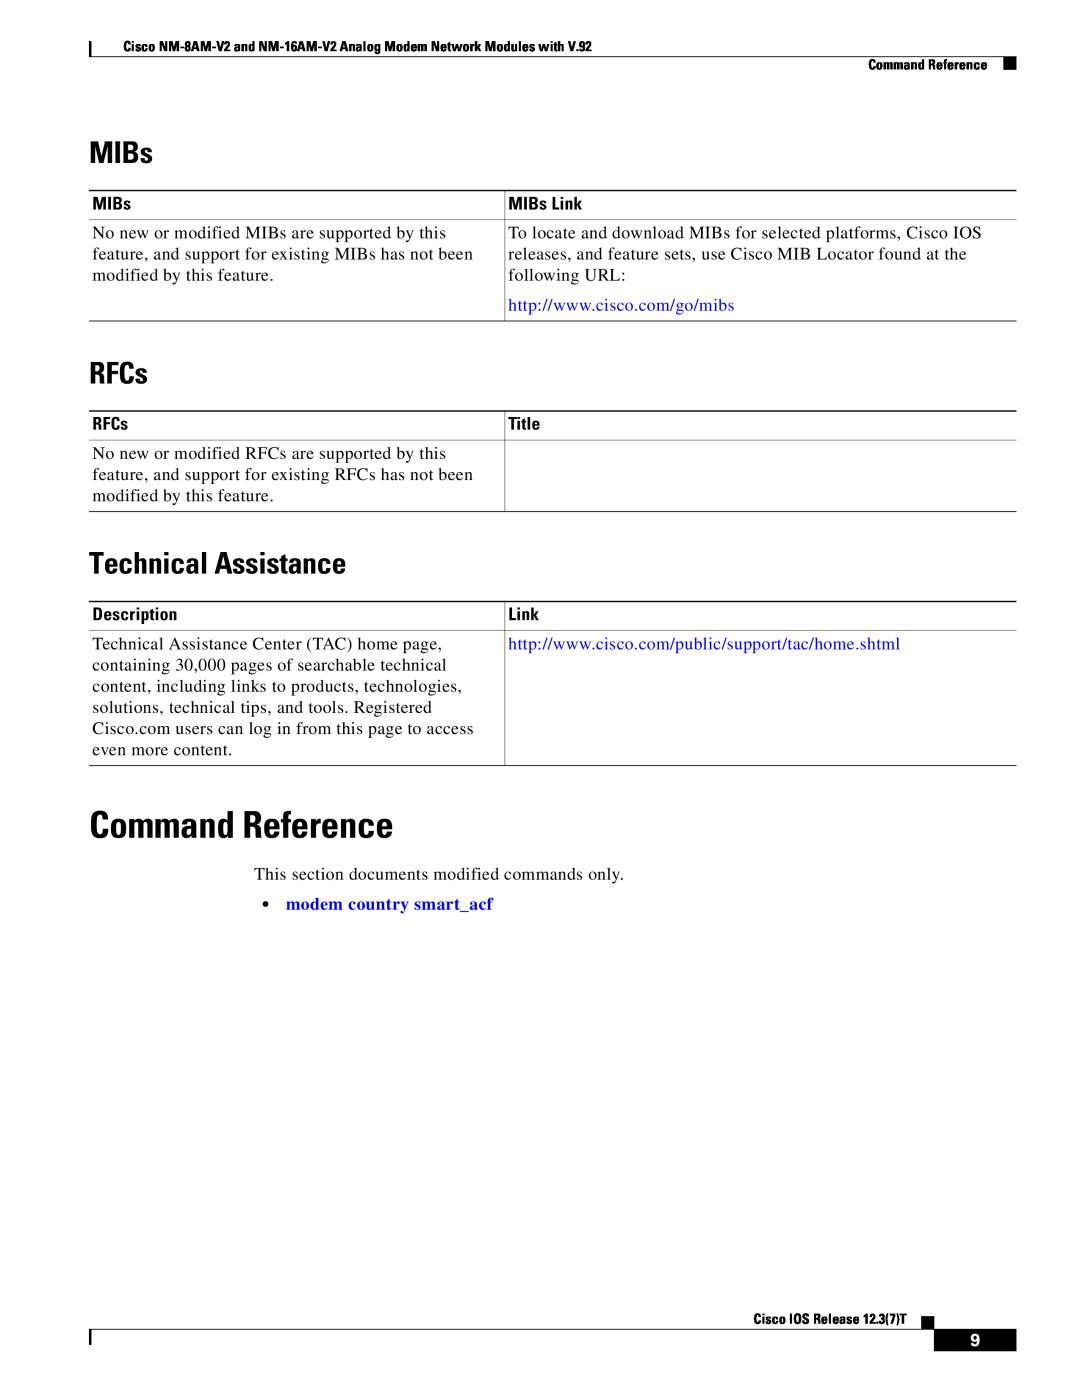 Cisco Systems NM-8AM-V2 Command Reference, RFCs, Technical Assistance, MIBs Link, Description, modem country smartacf 